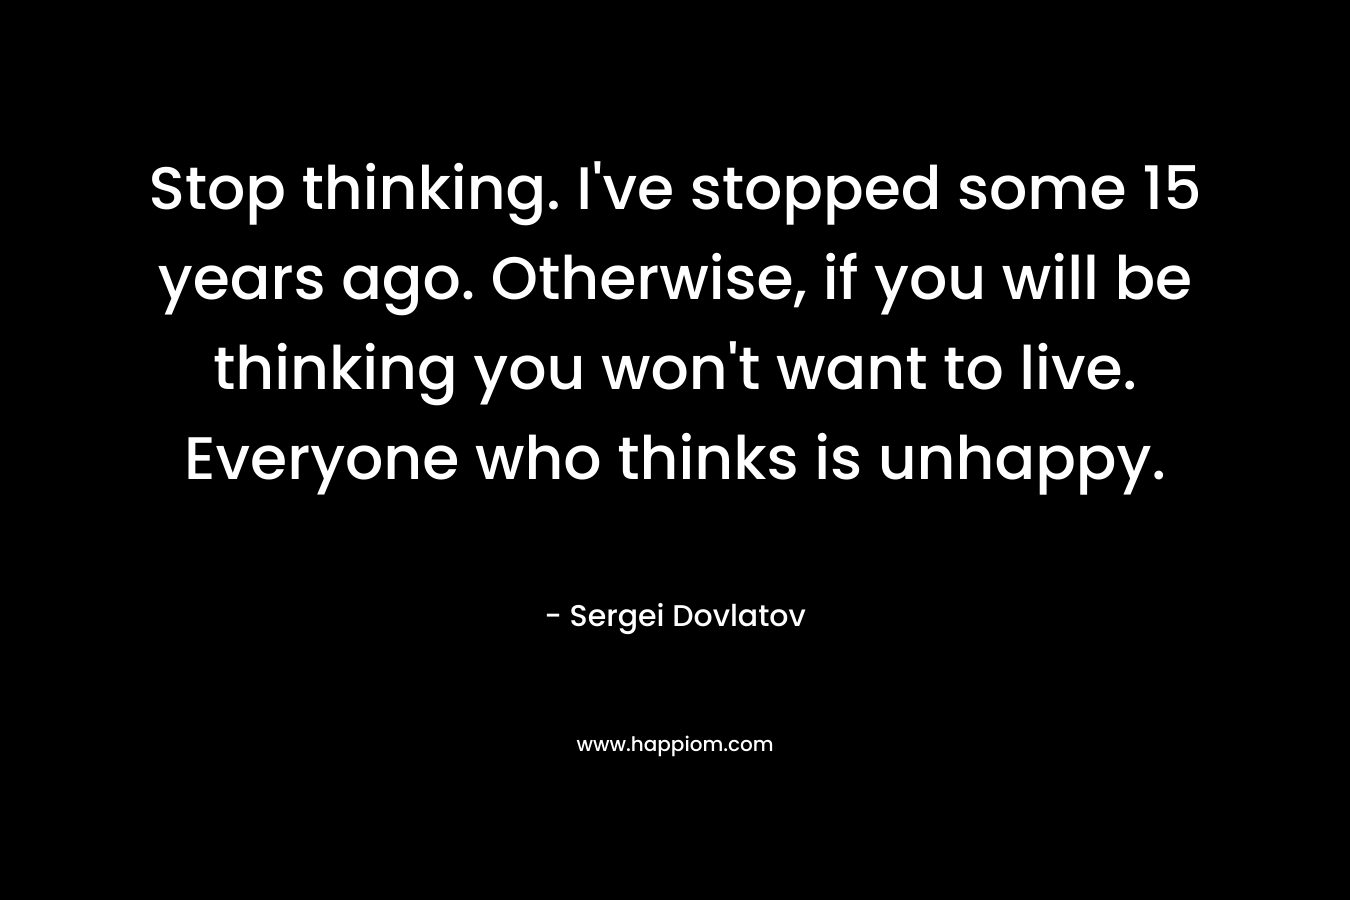 Stop thinking. I've stopped some 15 years ago. Otherwise, if you will be thinking you won't want to live. Everyone who thinks is unhappy.